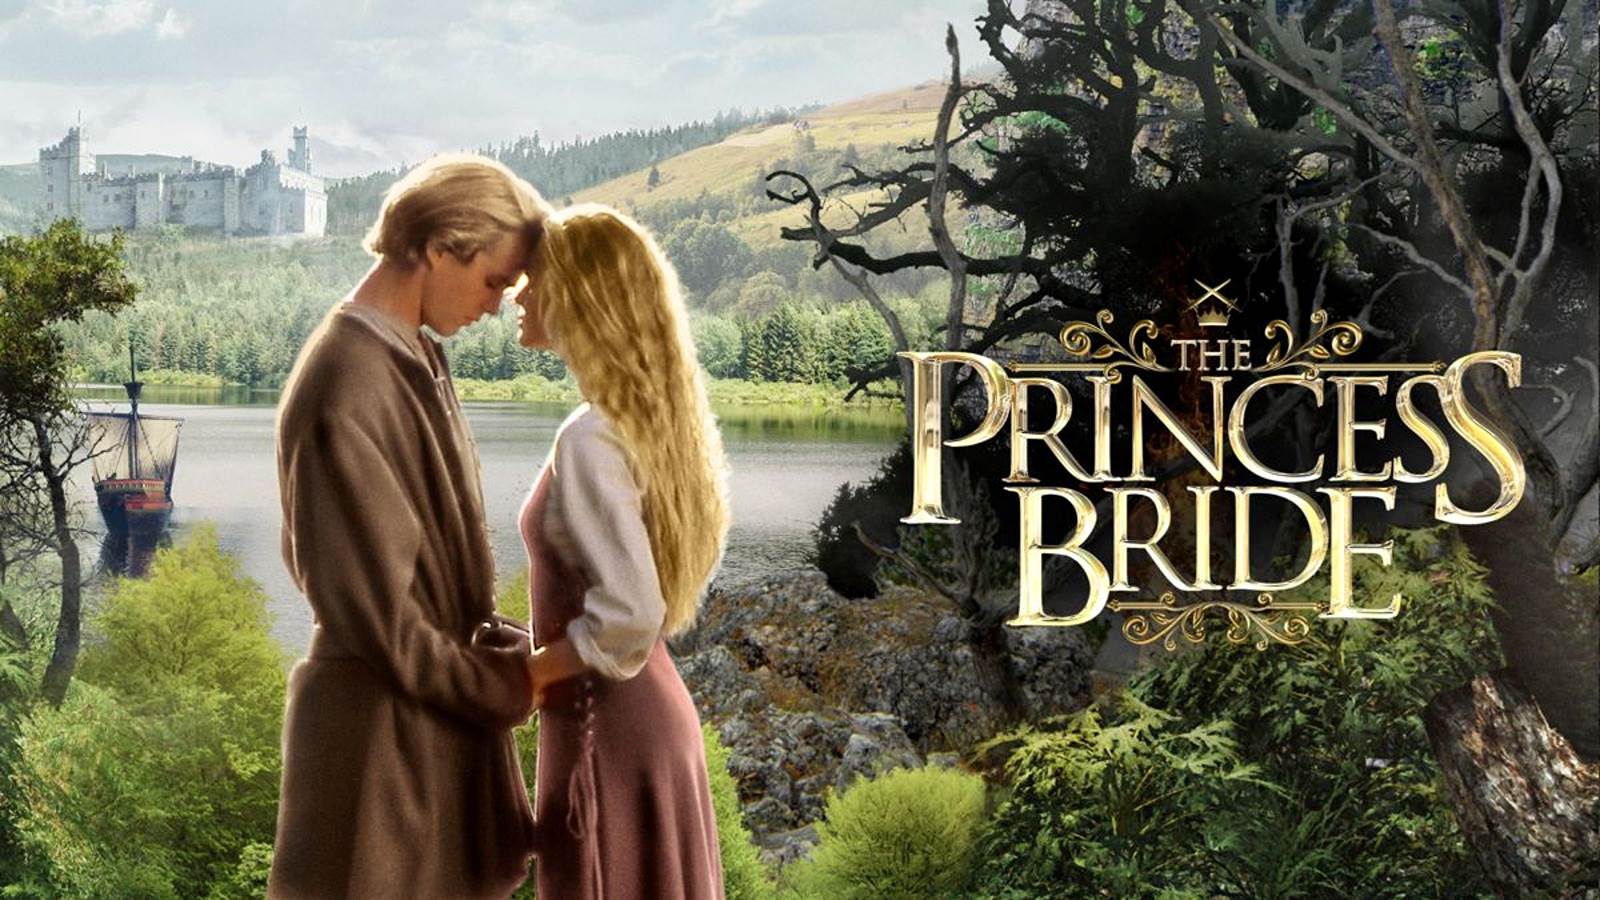 https://www.kennedy-center.org/globalassets/whats-on/millennium-stage/2023/07.-july/film_the-princess-bride_web.jpg?width=1600&quality=70